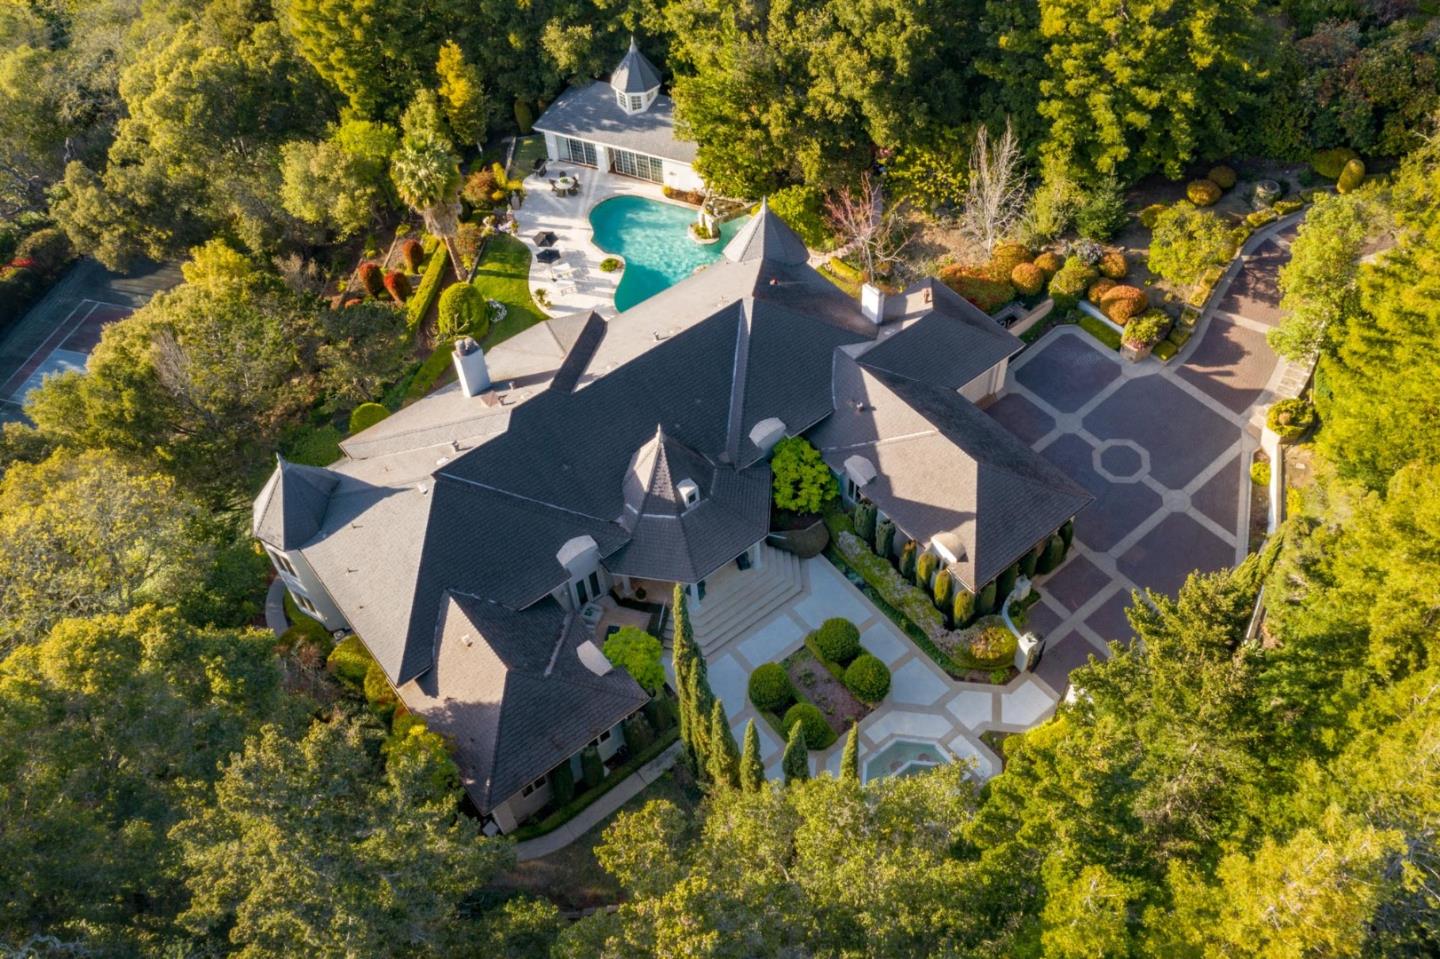 European grandeur and sophistication await in this spectacular gated estate, nestled in supreme privacy on 2.16 acres. Luxurious appointments include stained and leaded glass, crystal chandeliers, hand-forged ironwork, and custom wall coverings. Offering 5 bedrooms, 6.5 bathrooms, and over 9,100 sq ft, this estate includes an in-home apartment, while a 1-bed, 1-bath guest home offers 700 sq ft of living space. Entertain guests with easy thanks to gathering spaces scaled for entertaining, a gourmet kitchen, and incredible grounds with a pool. Work from home in style in the office, and unwind in the Parisian wine cellar and Old English bar. The master suite features a fireplace and spa-like bathroom, while 3 additional guest suites are perfect for friends and family alike. Convenient to Stanford University, Sand Hill Road, and both downtown Menlo Park and Palo Alto, this home is also served by acclaimed Las Lomitas schools, with top private schools close at hand.